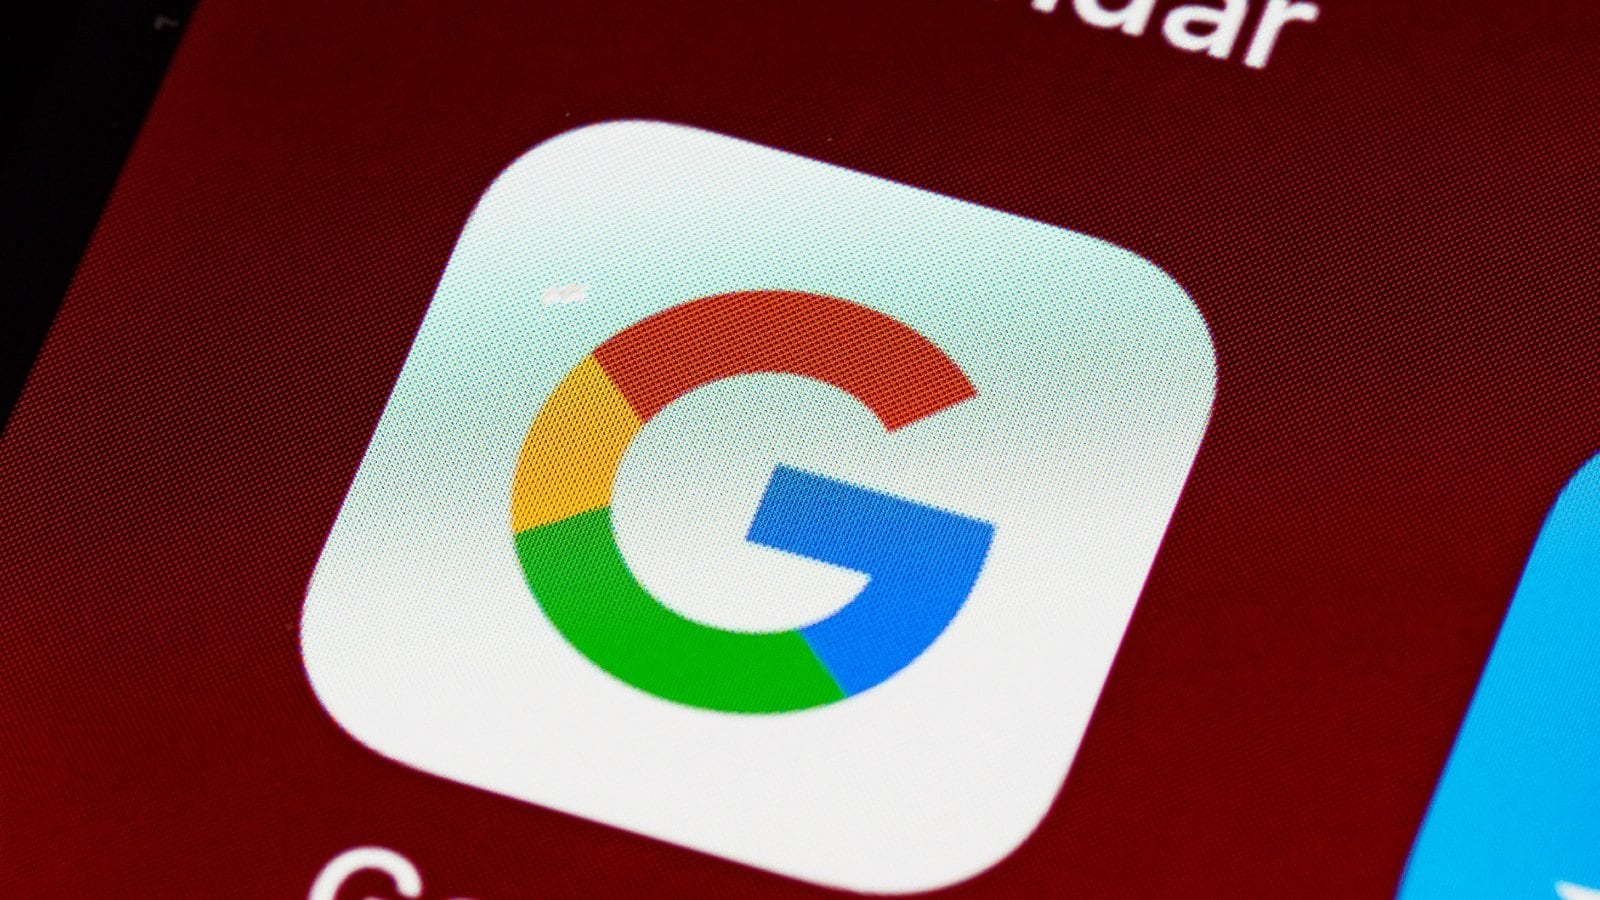 Read more about the article Google Search Will Soon Offer Blurred Explicit Images By Default